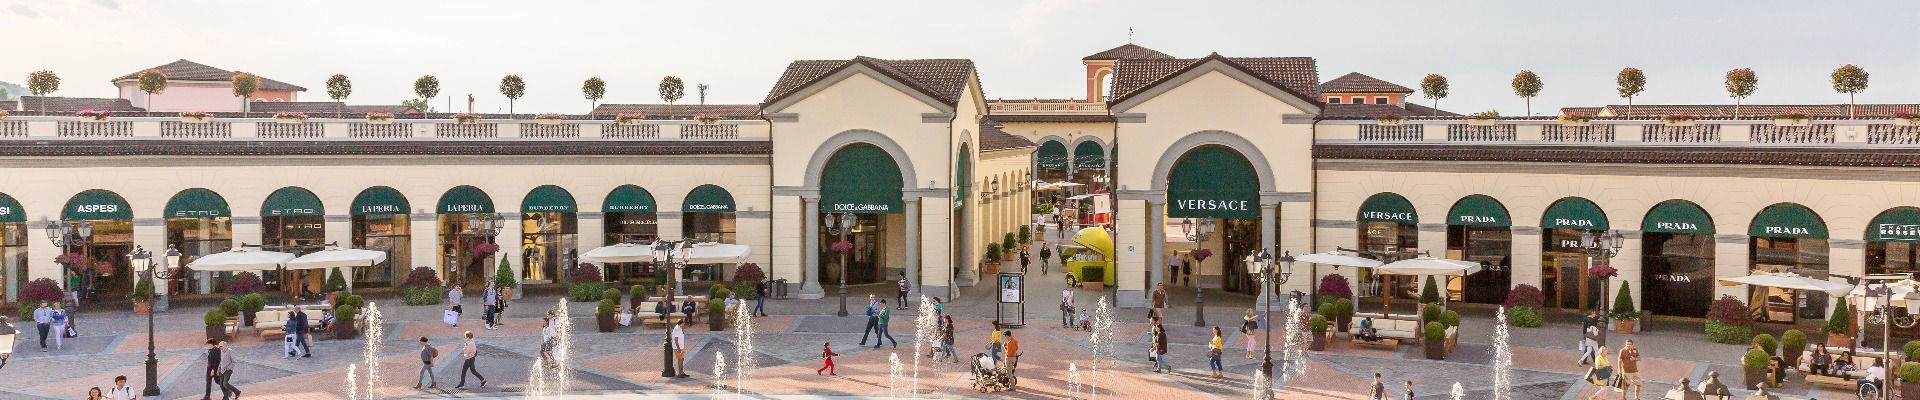 Outlet milano Outlet Shopping